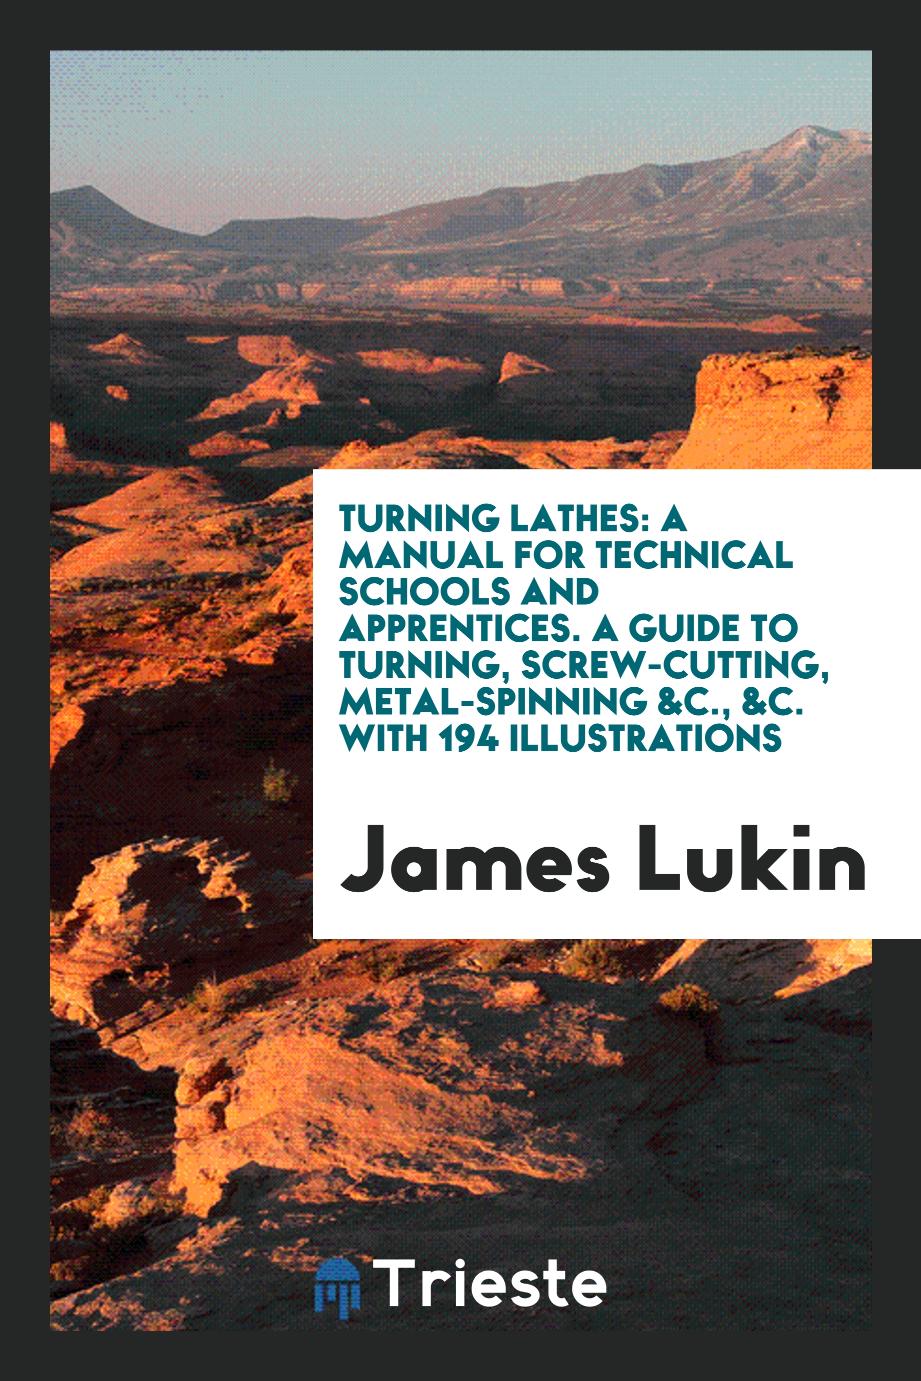 Turning Lathes: A Manual for Technical Schools and Apprentices. A Guide to Turning, Screw-Cutting, Metal-Spinning &c., &c. With 194 Illustrations